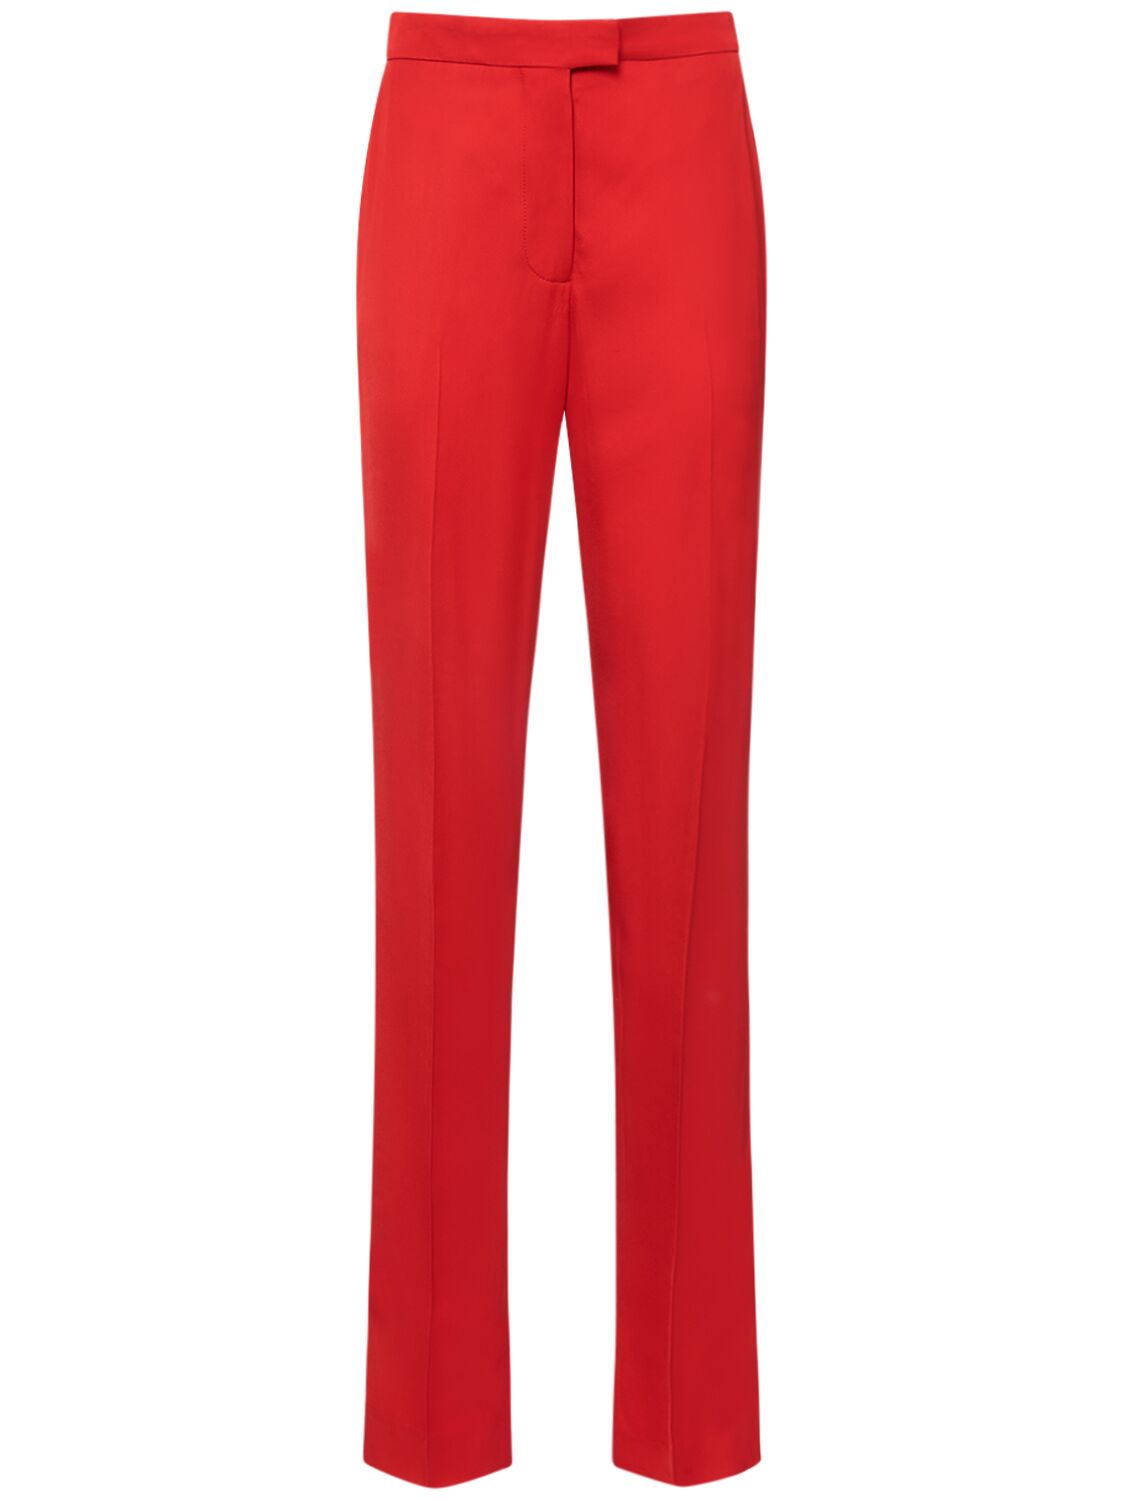 Alexander Mcqueen Tailored Viscose Pants In Lust Red